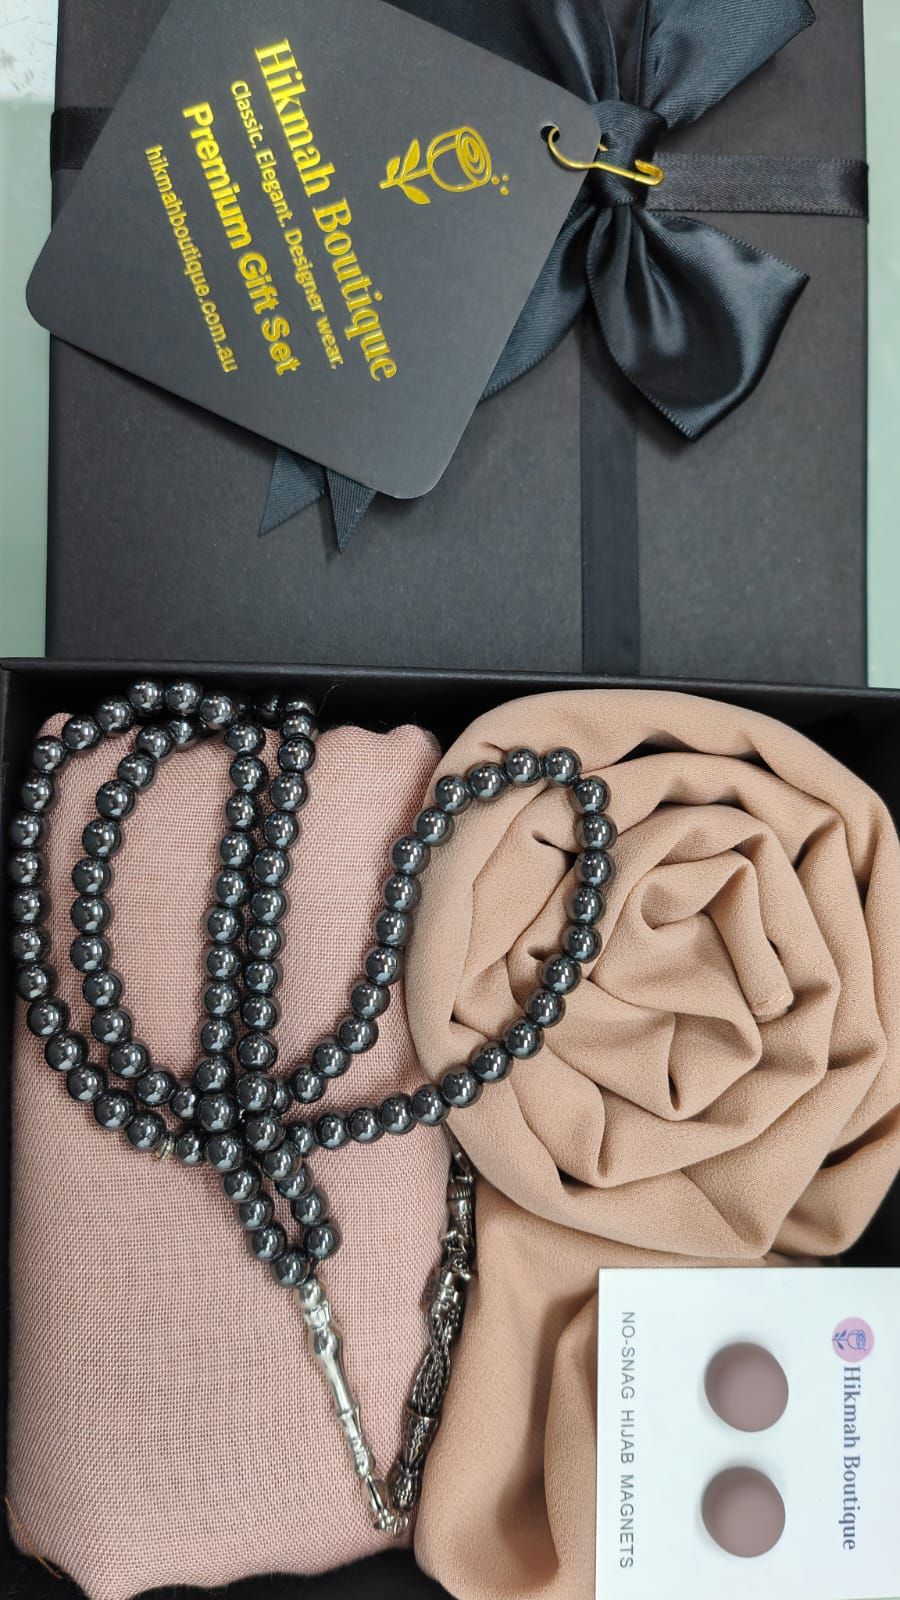 Discover elegance with our My First Hijab Gift Box. Premium chiffon and viscose hijabs, matching magnetic pins, Tasbih in a beautifully designed gift box. The perfect gift for new reverts or Muslimah.